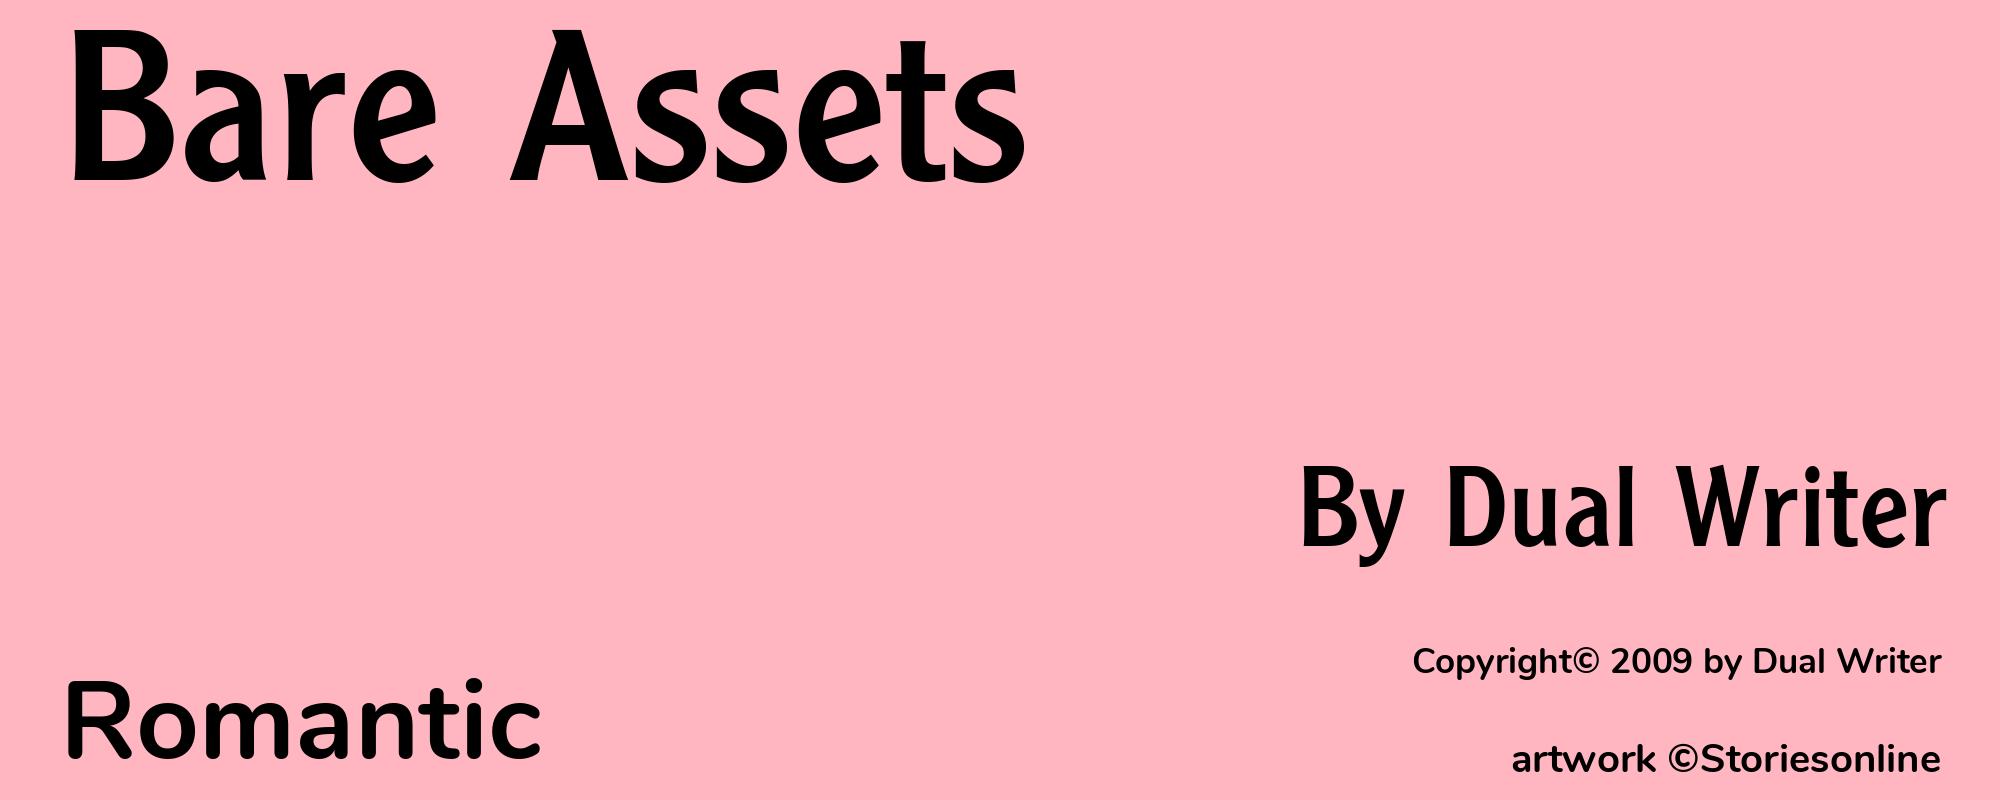 Bare Assets - Cover